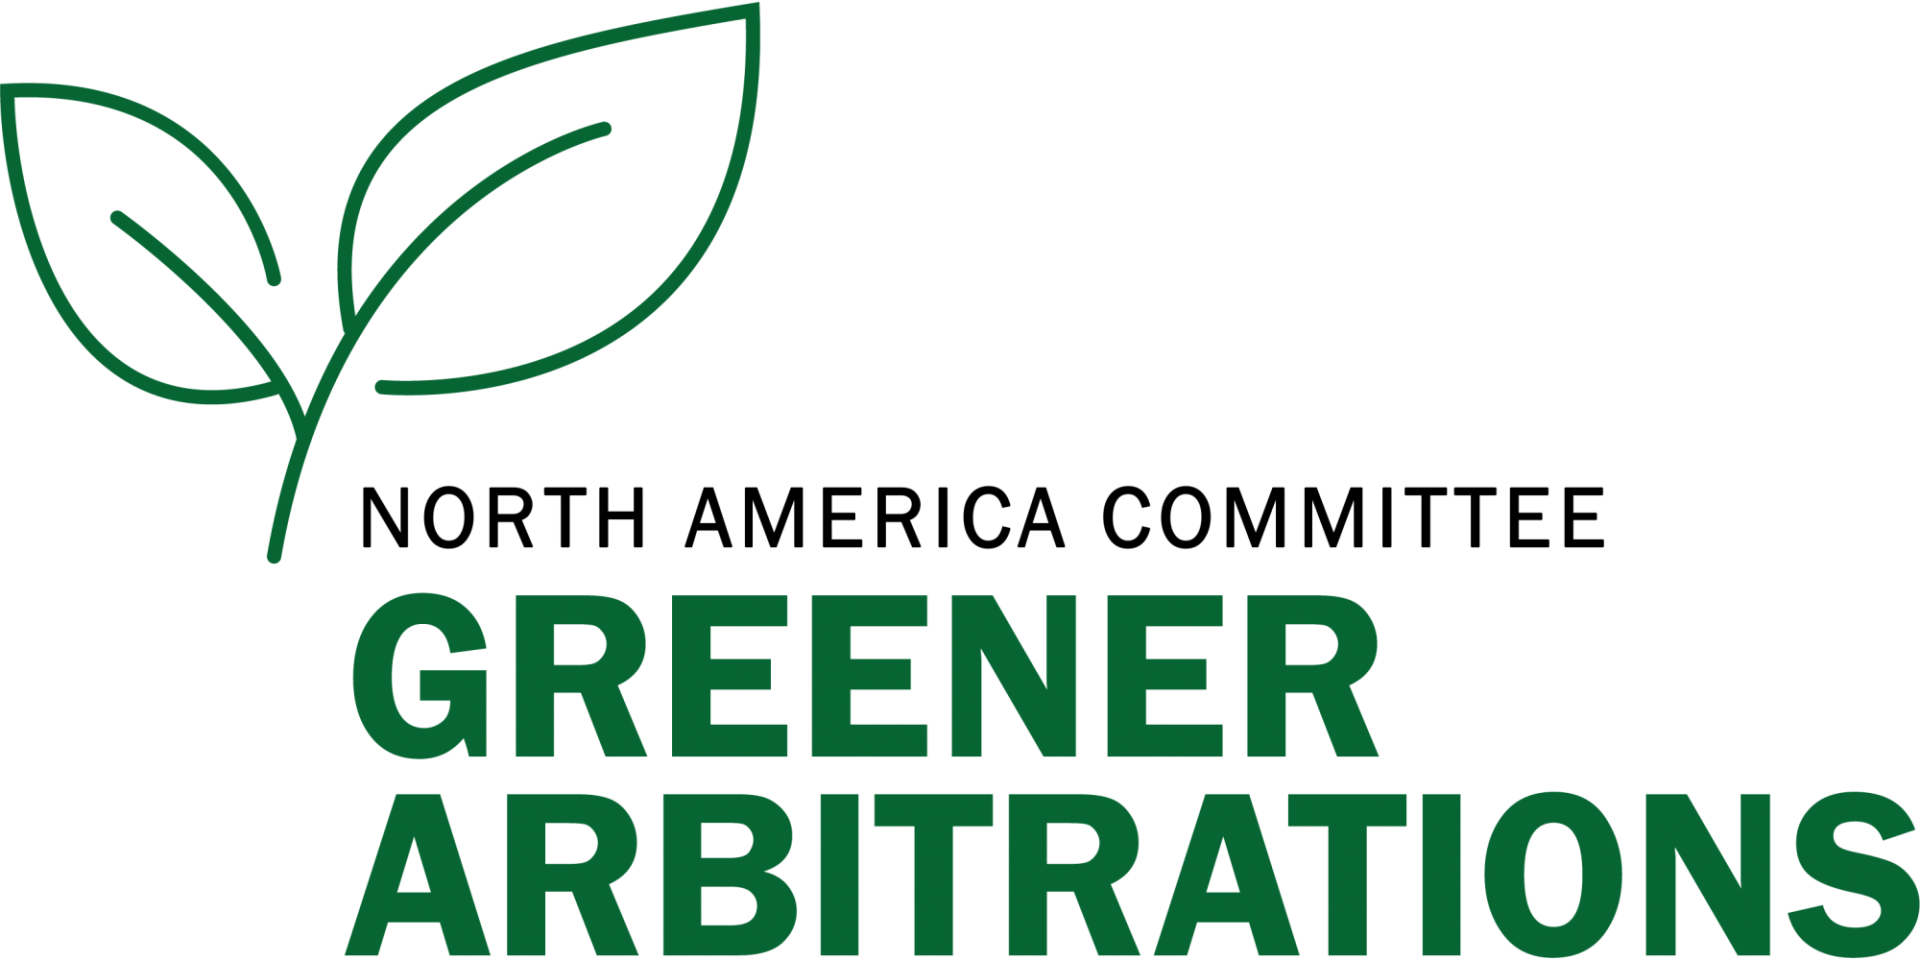 Conference inspired by the Greener Arbitration Protocols for Conferences